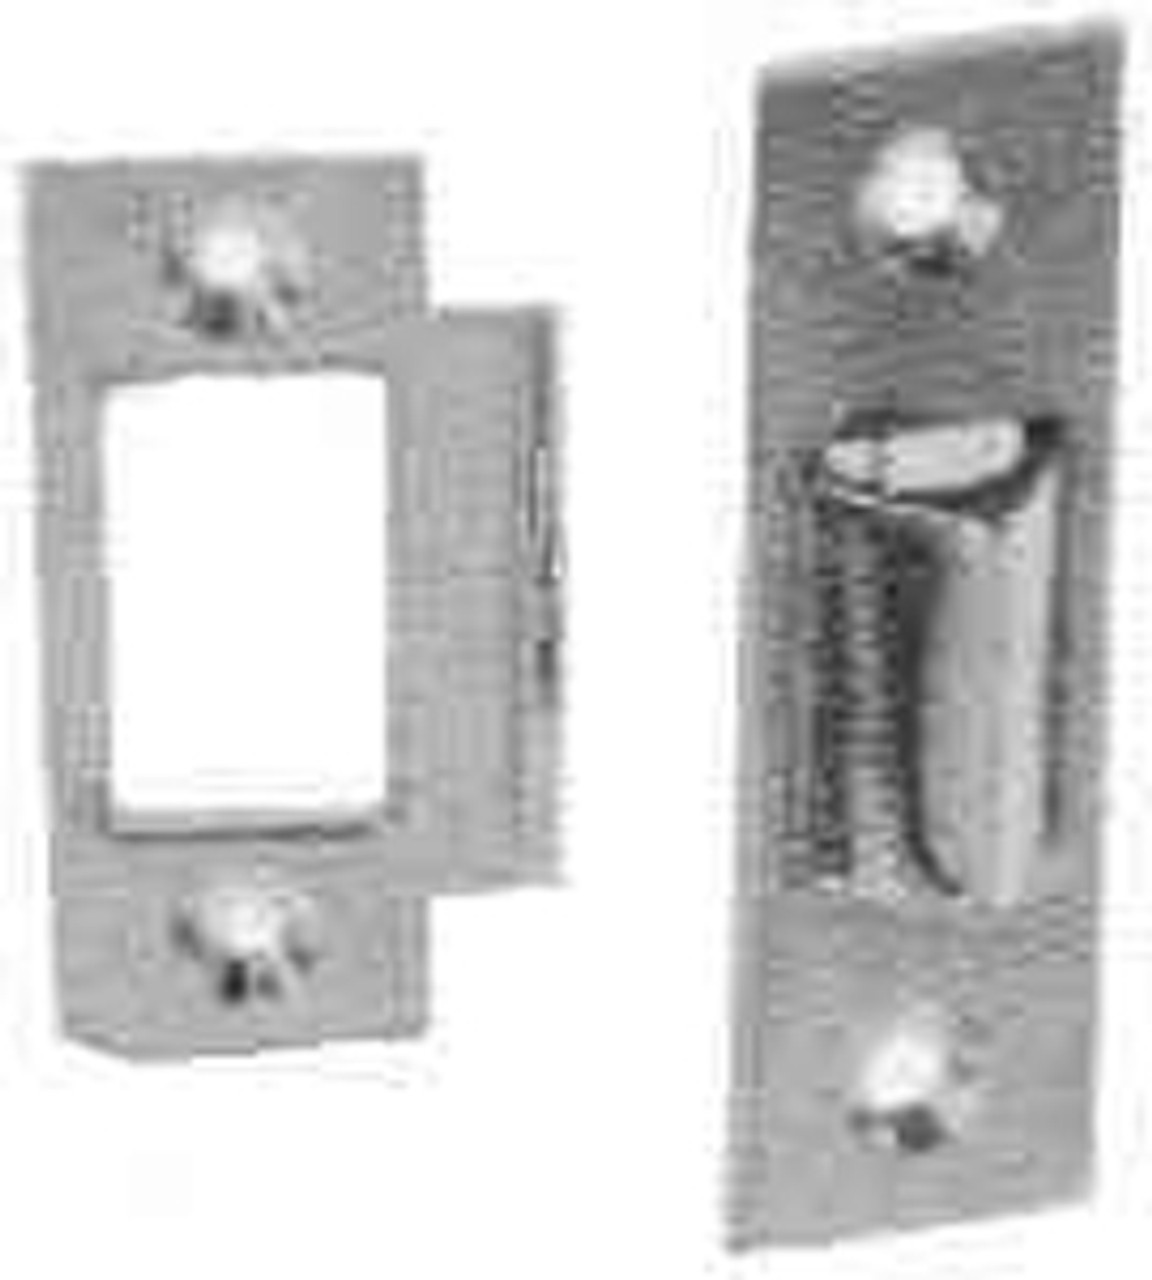 IMPA 490903 FRICTION LATCH FOR CABINET DOOR  STAINLESS STEEL